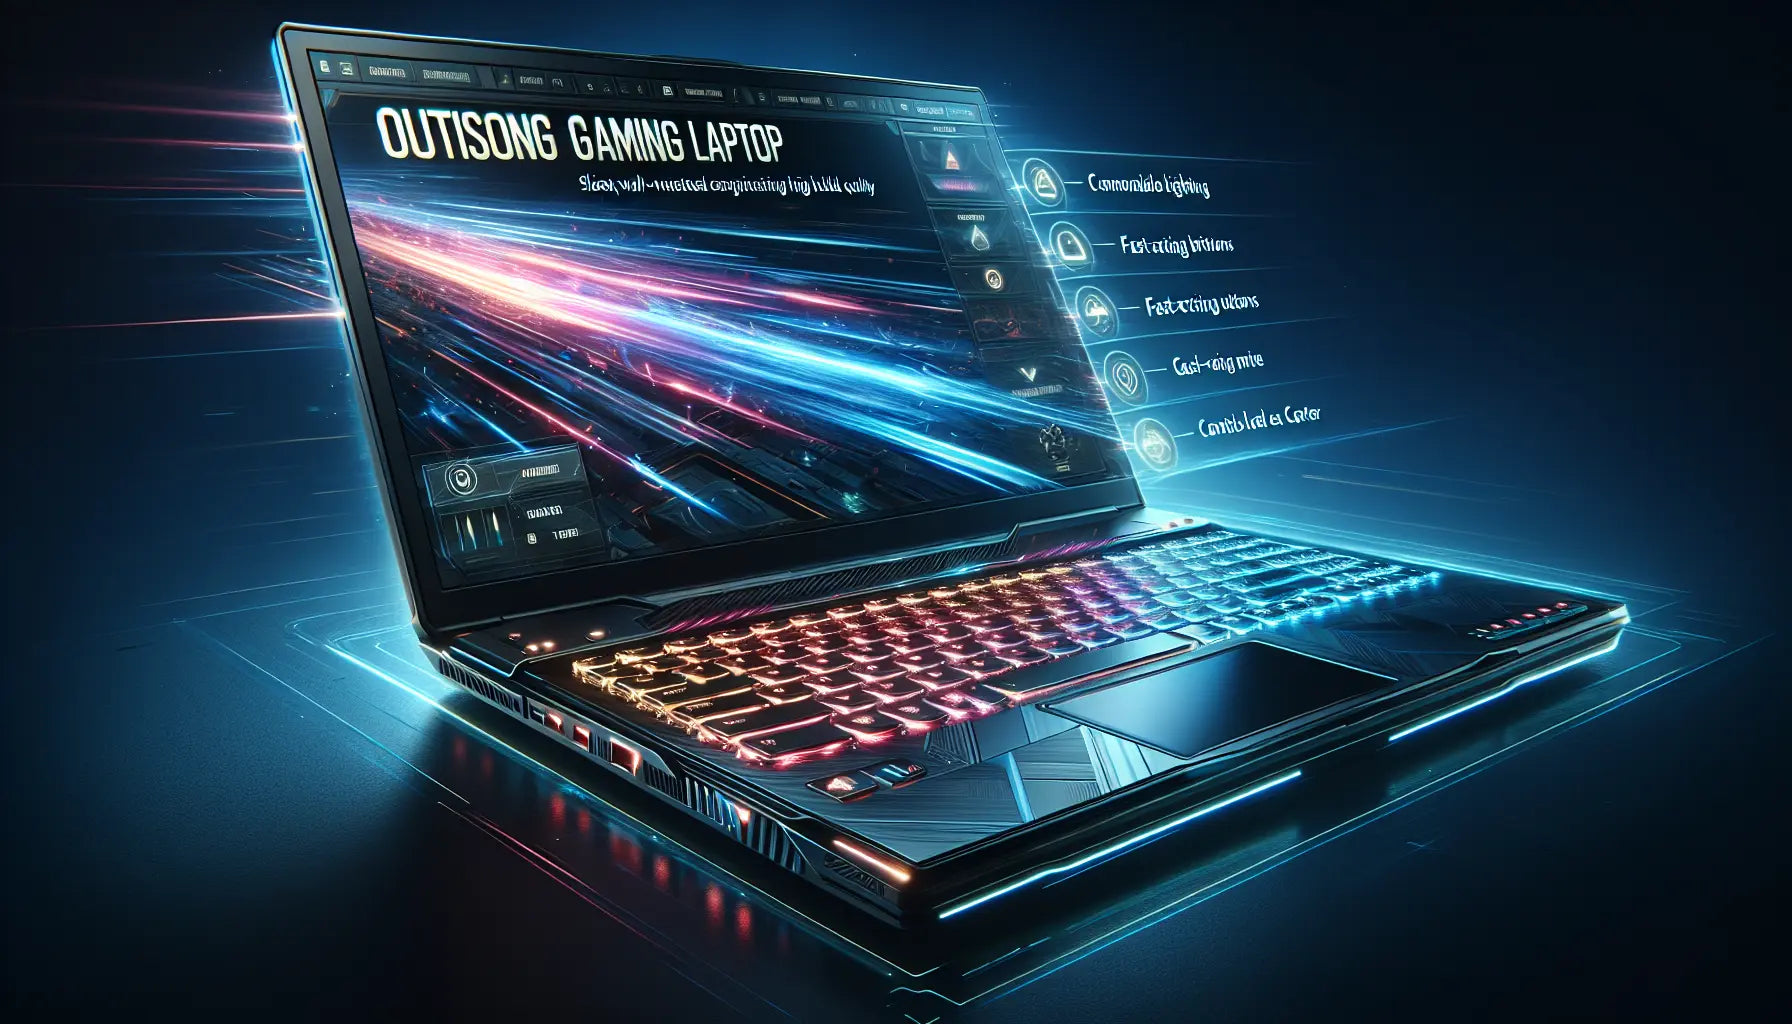 ASUS ROG GU501G: The Ultimate Gaming Laptop with Core i7 8th Gen